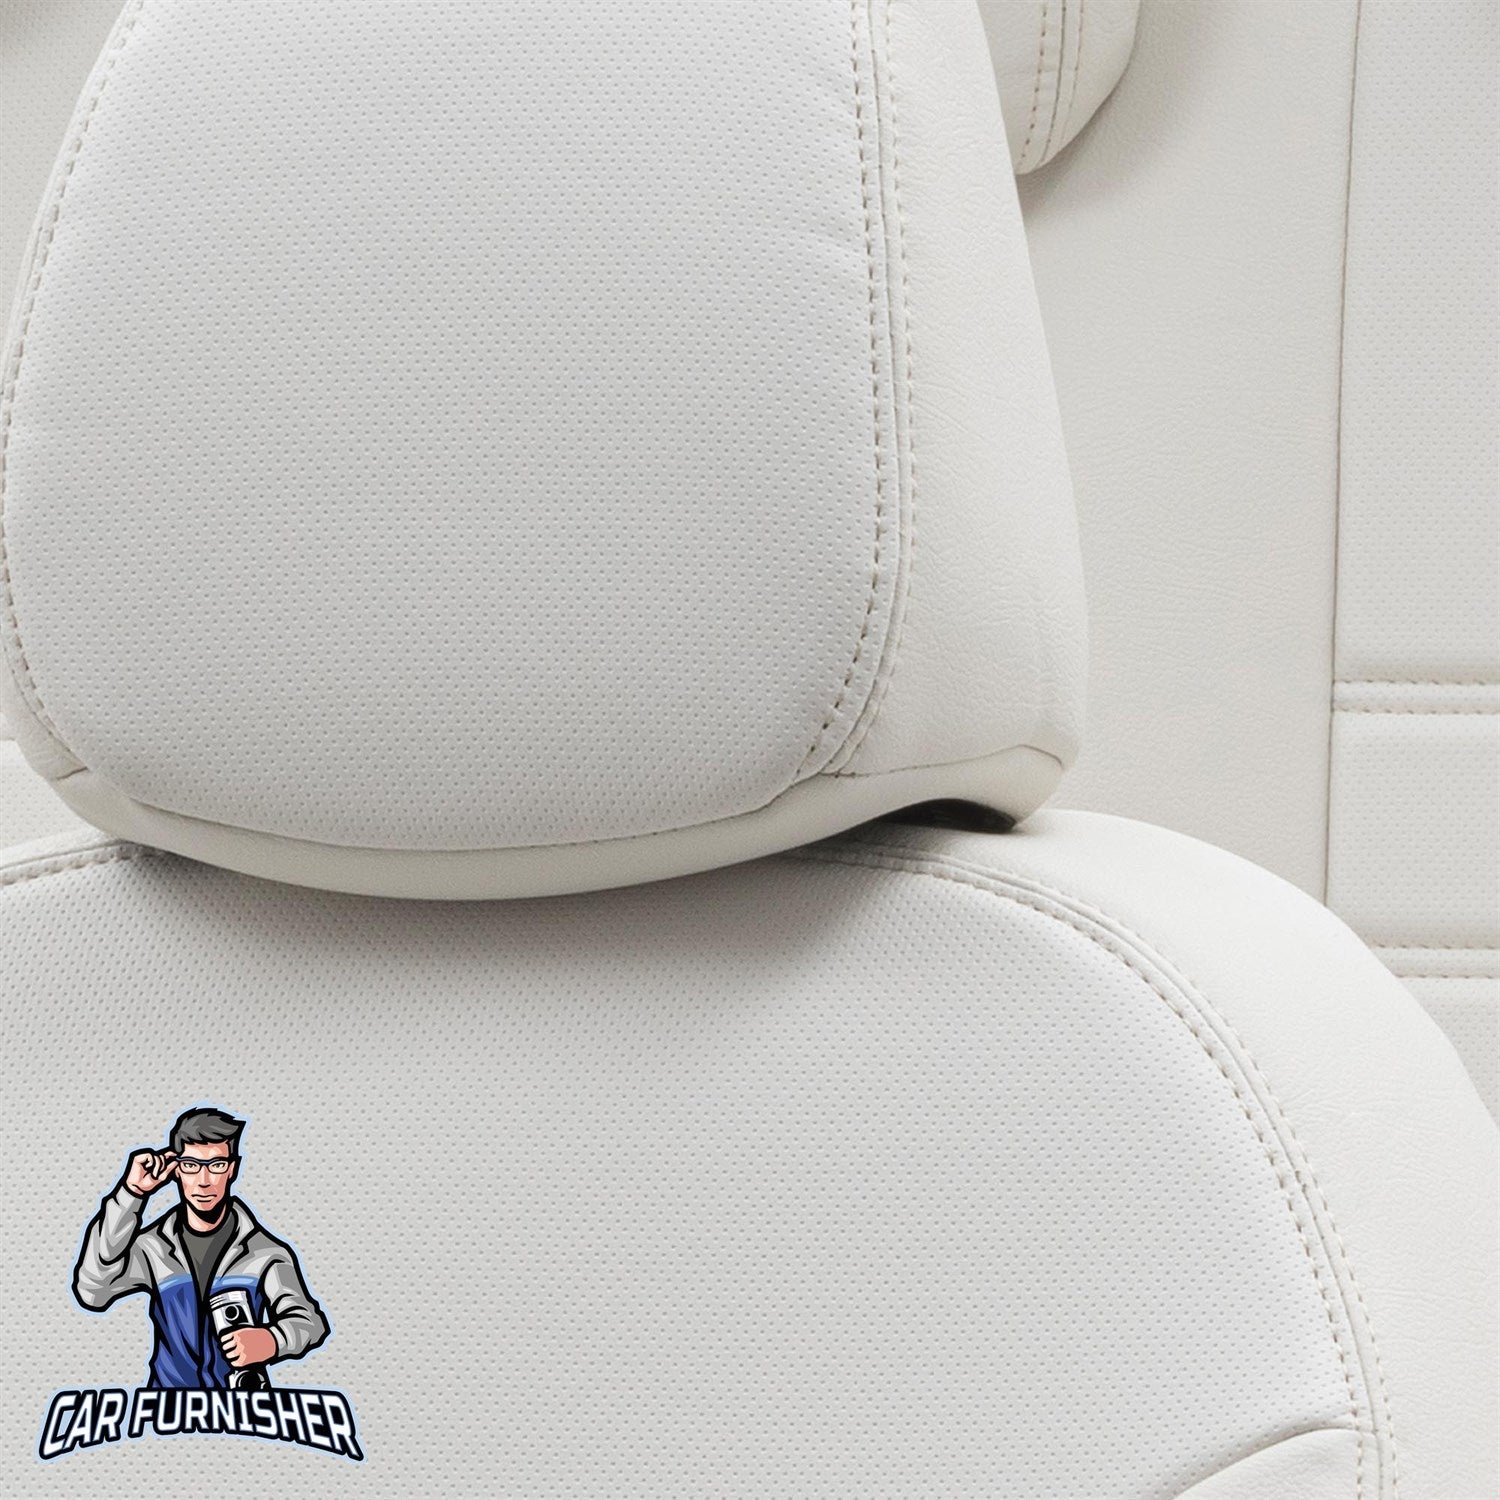 Mazda E2200 Seat Covers Istanbul Leather Design Ivory Leather